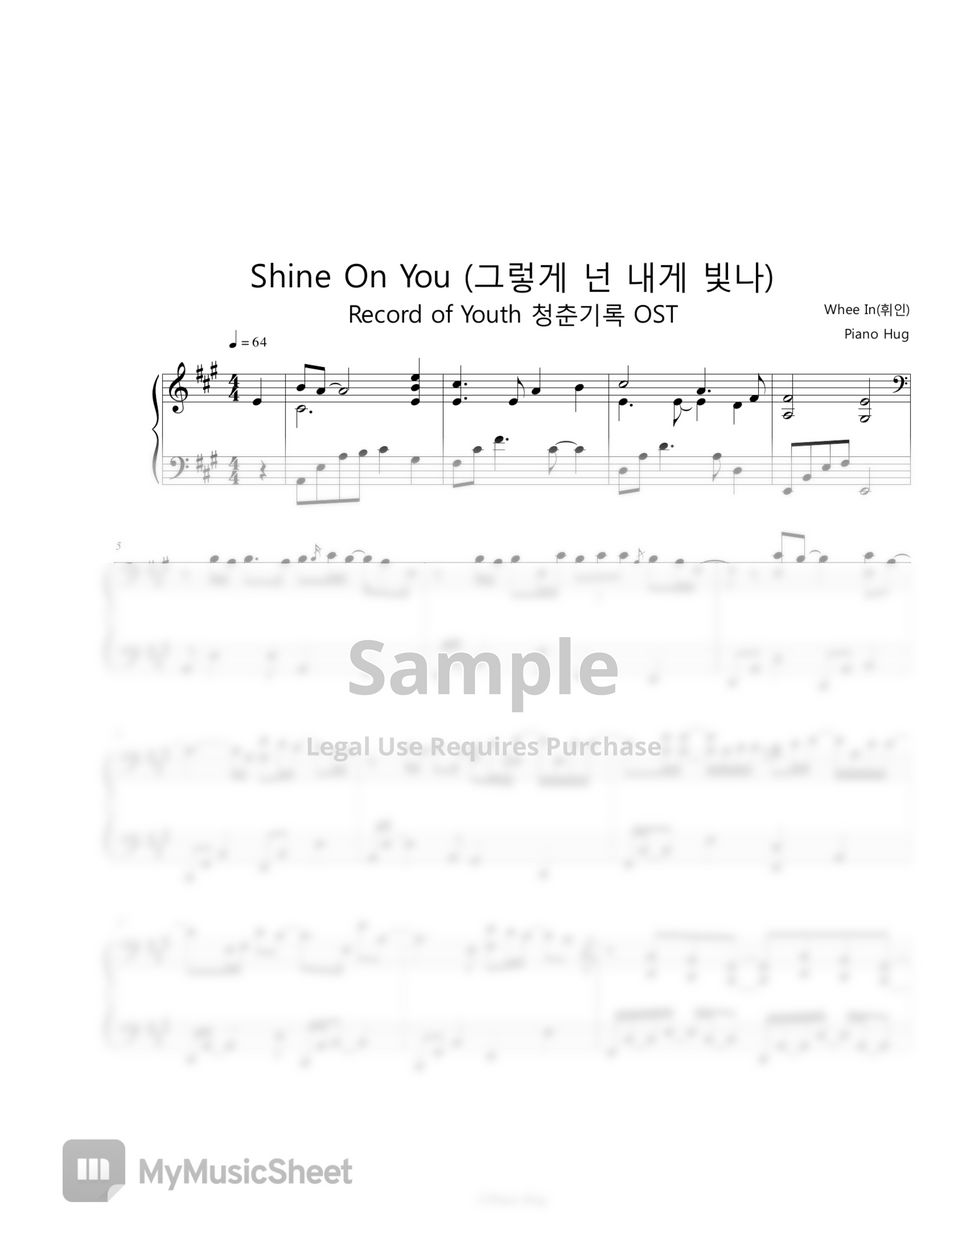 Whee In (휘인) - Shine On You (그렇게 넌 내게 빛나) Record of Youth 청춘기록 OST by Piano Hug